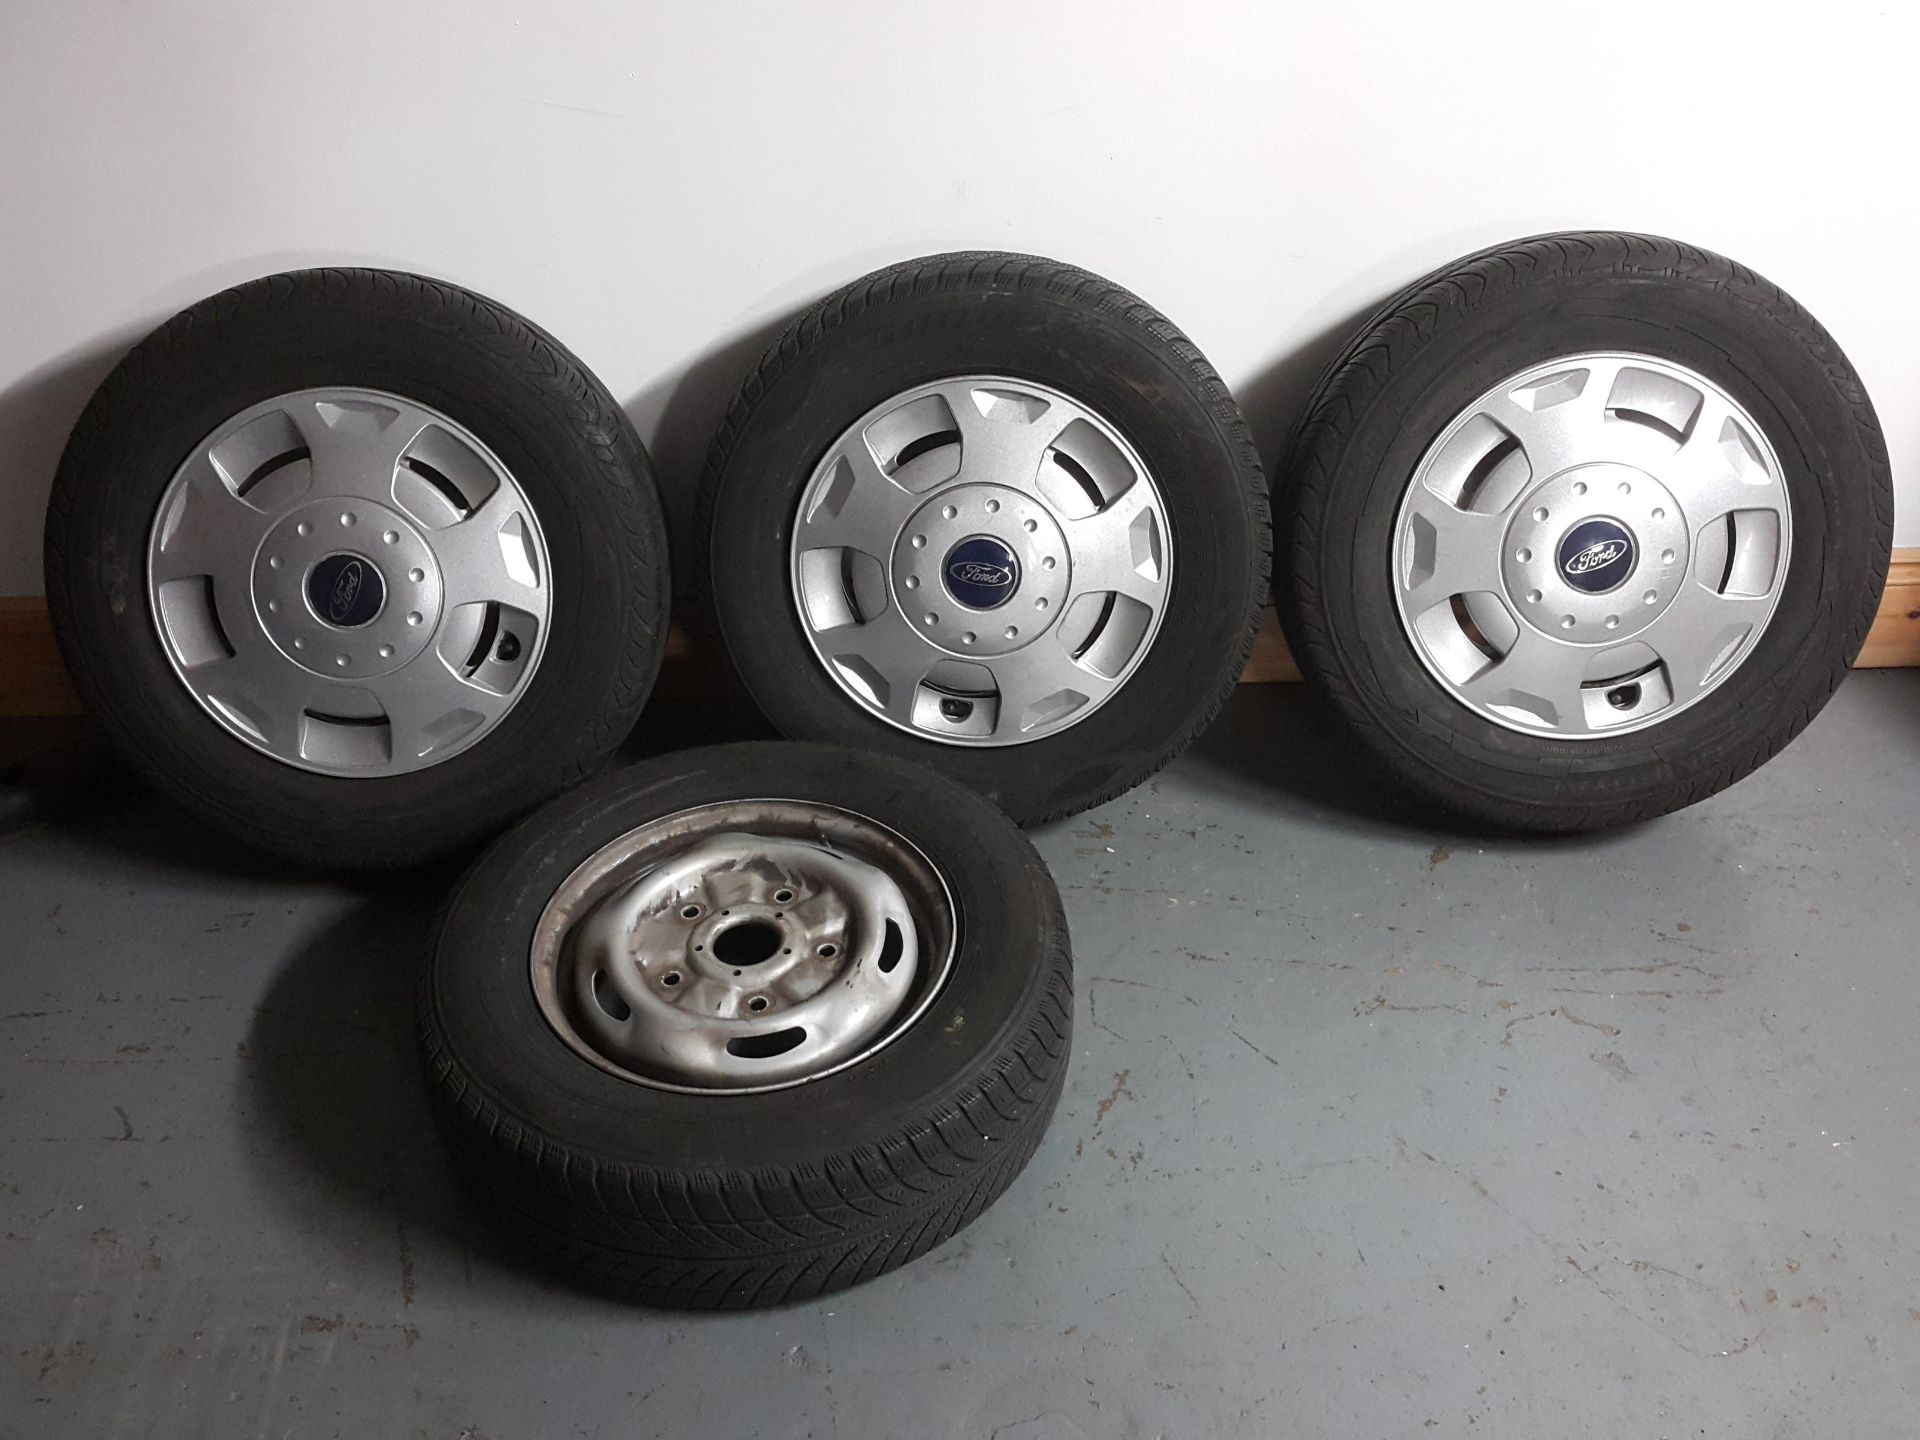 4 X FORD TRANSIT 15" STEEL RIMS WITH TYRES 195/70/R15 (2 UNIROYAL 2 OTHERS)